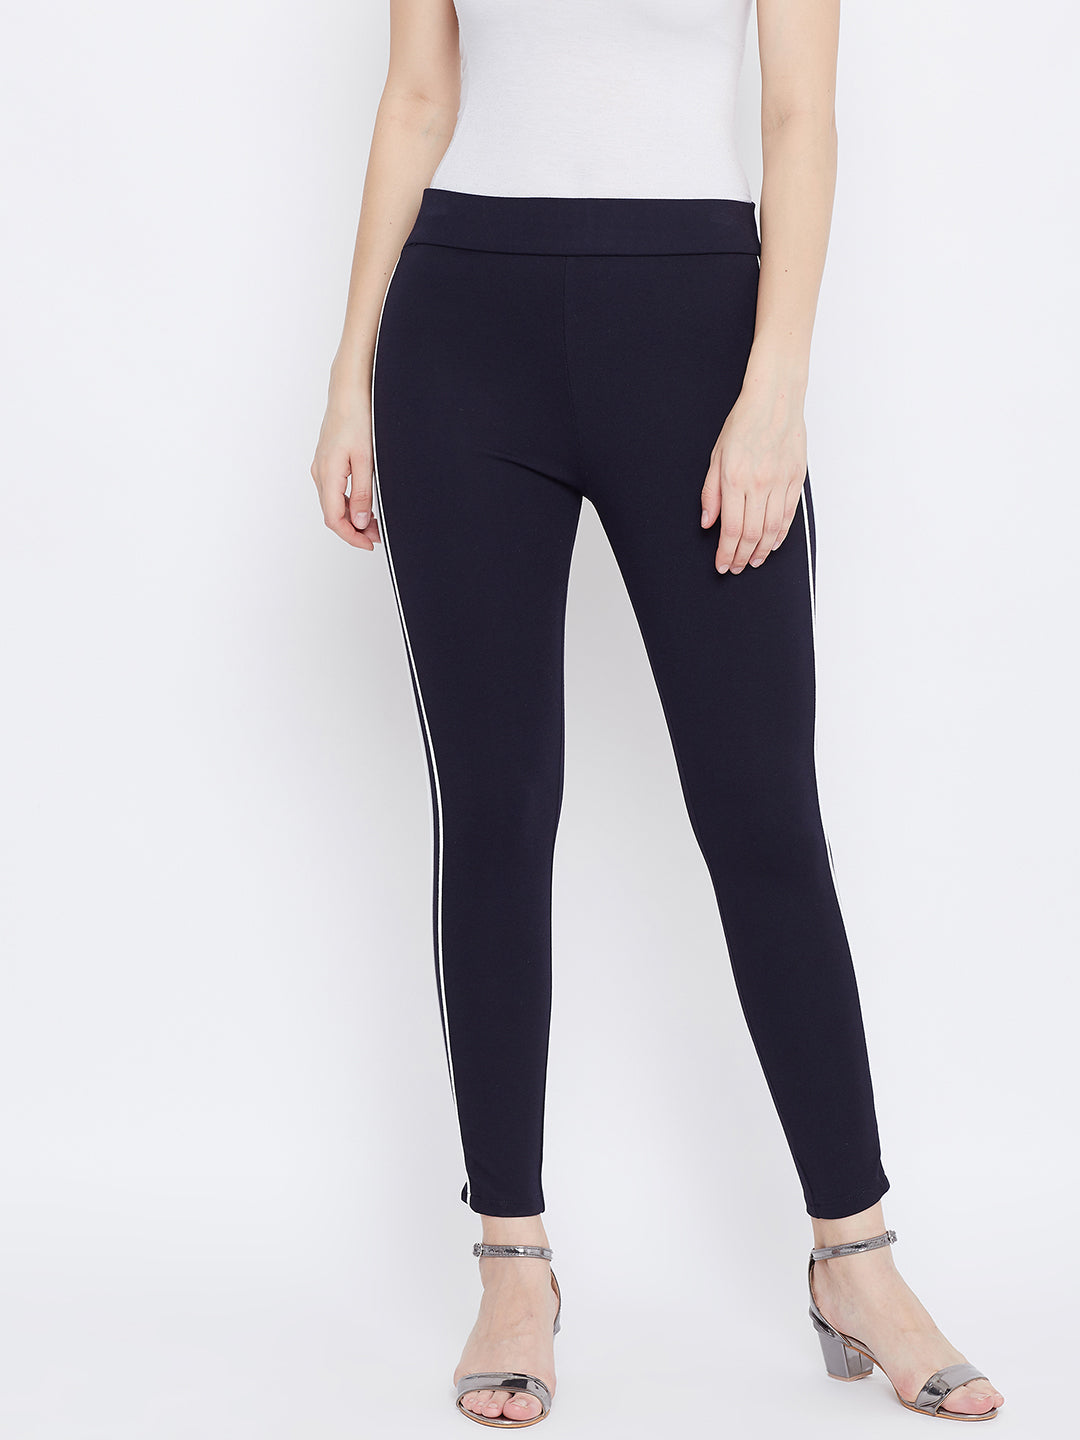 Buy Clora Navy Blue Solid Striped Jeggings Online at Best Price - Clora  Creation